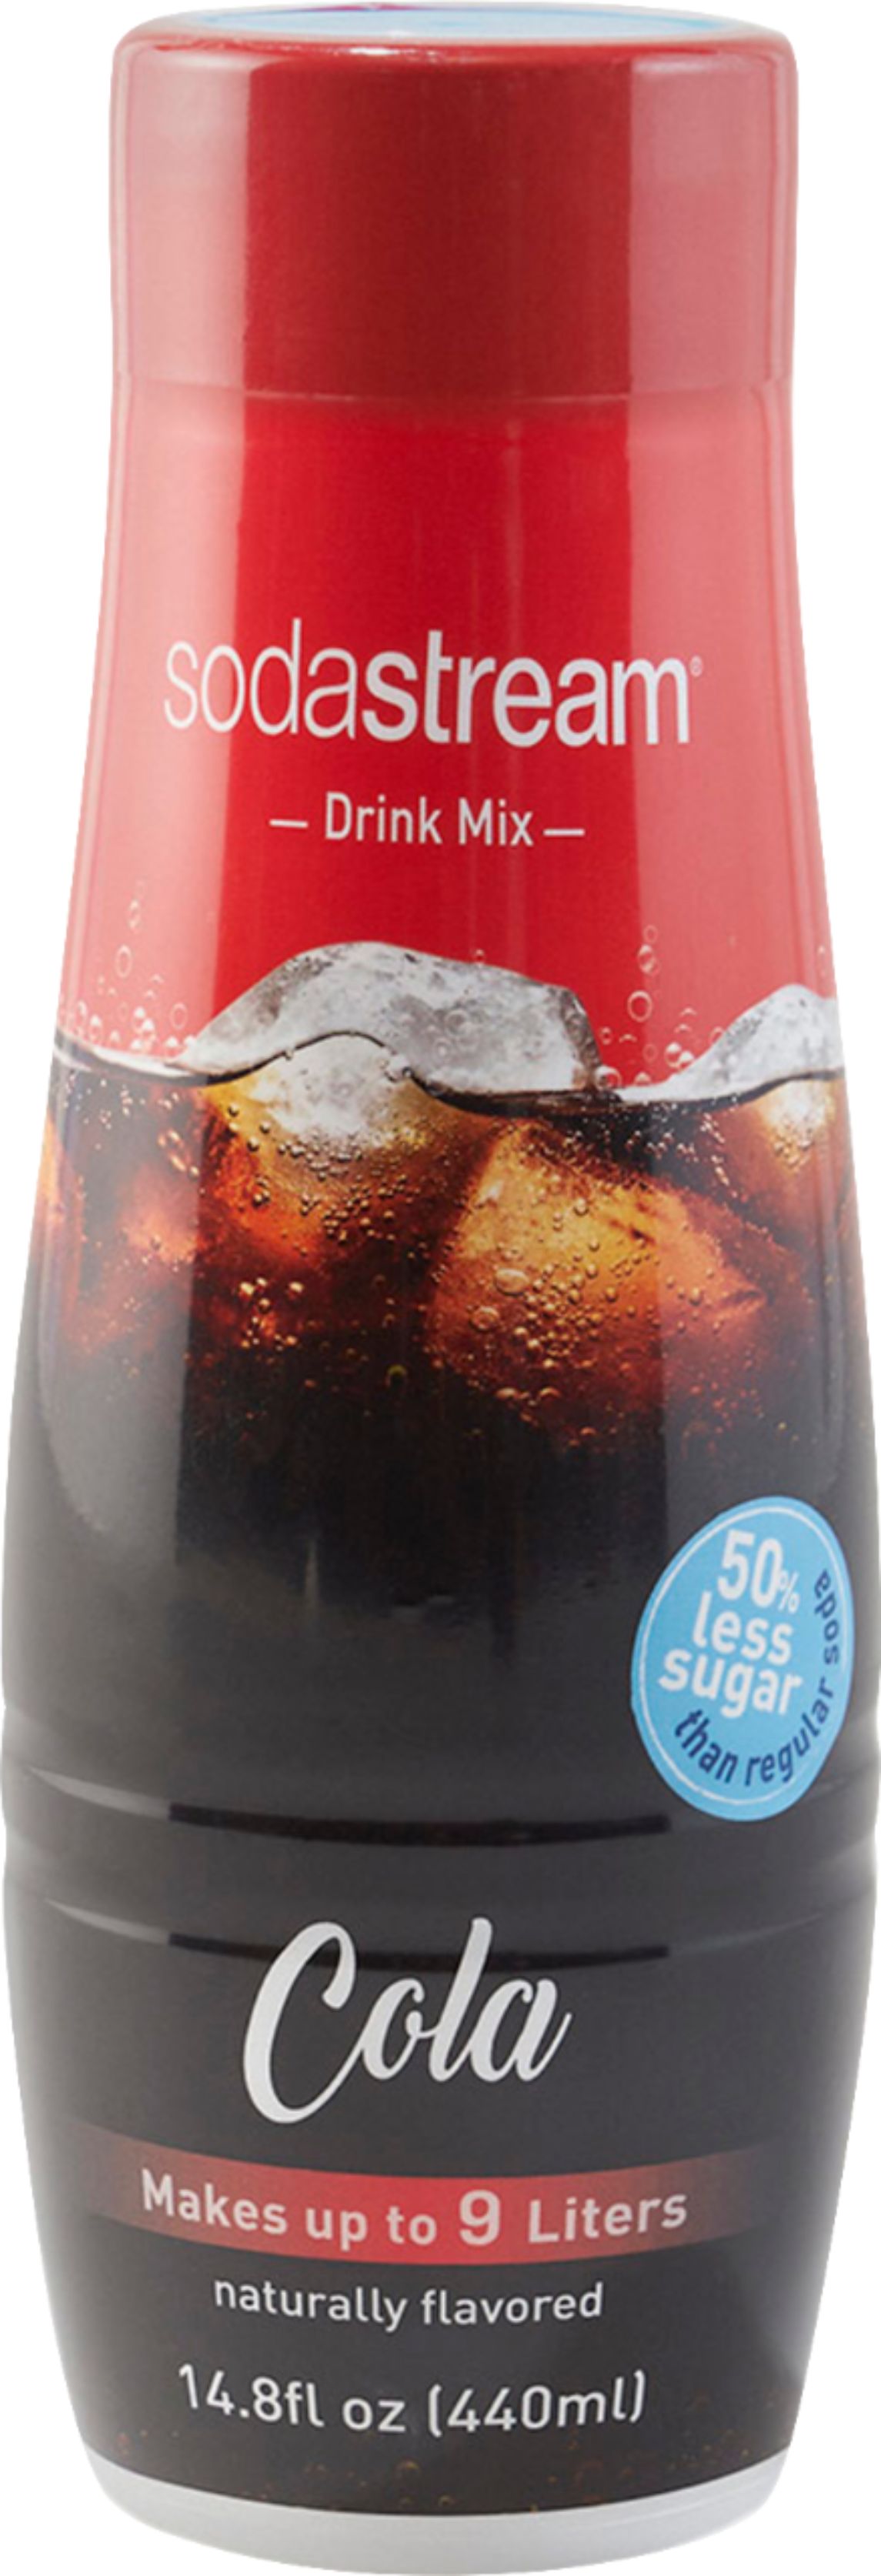 Best Buy: SodaStream Fountain-Style Cola Sparkling Drink Mix